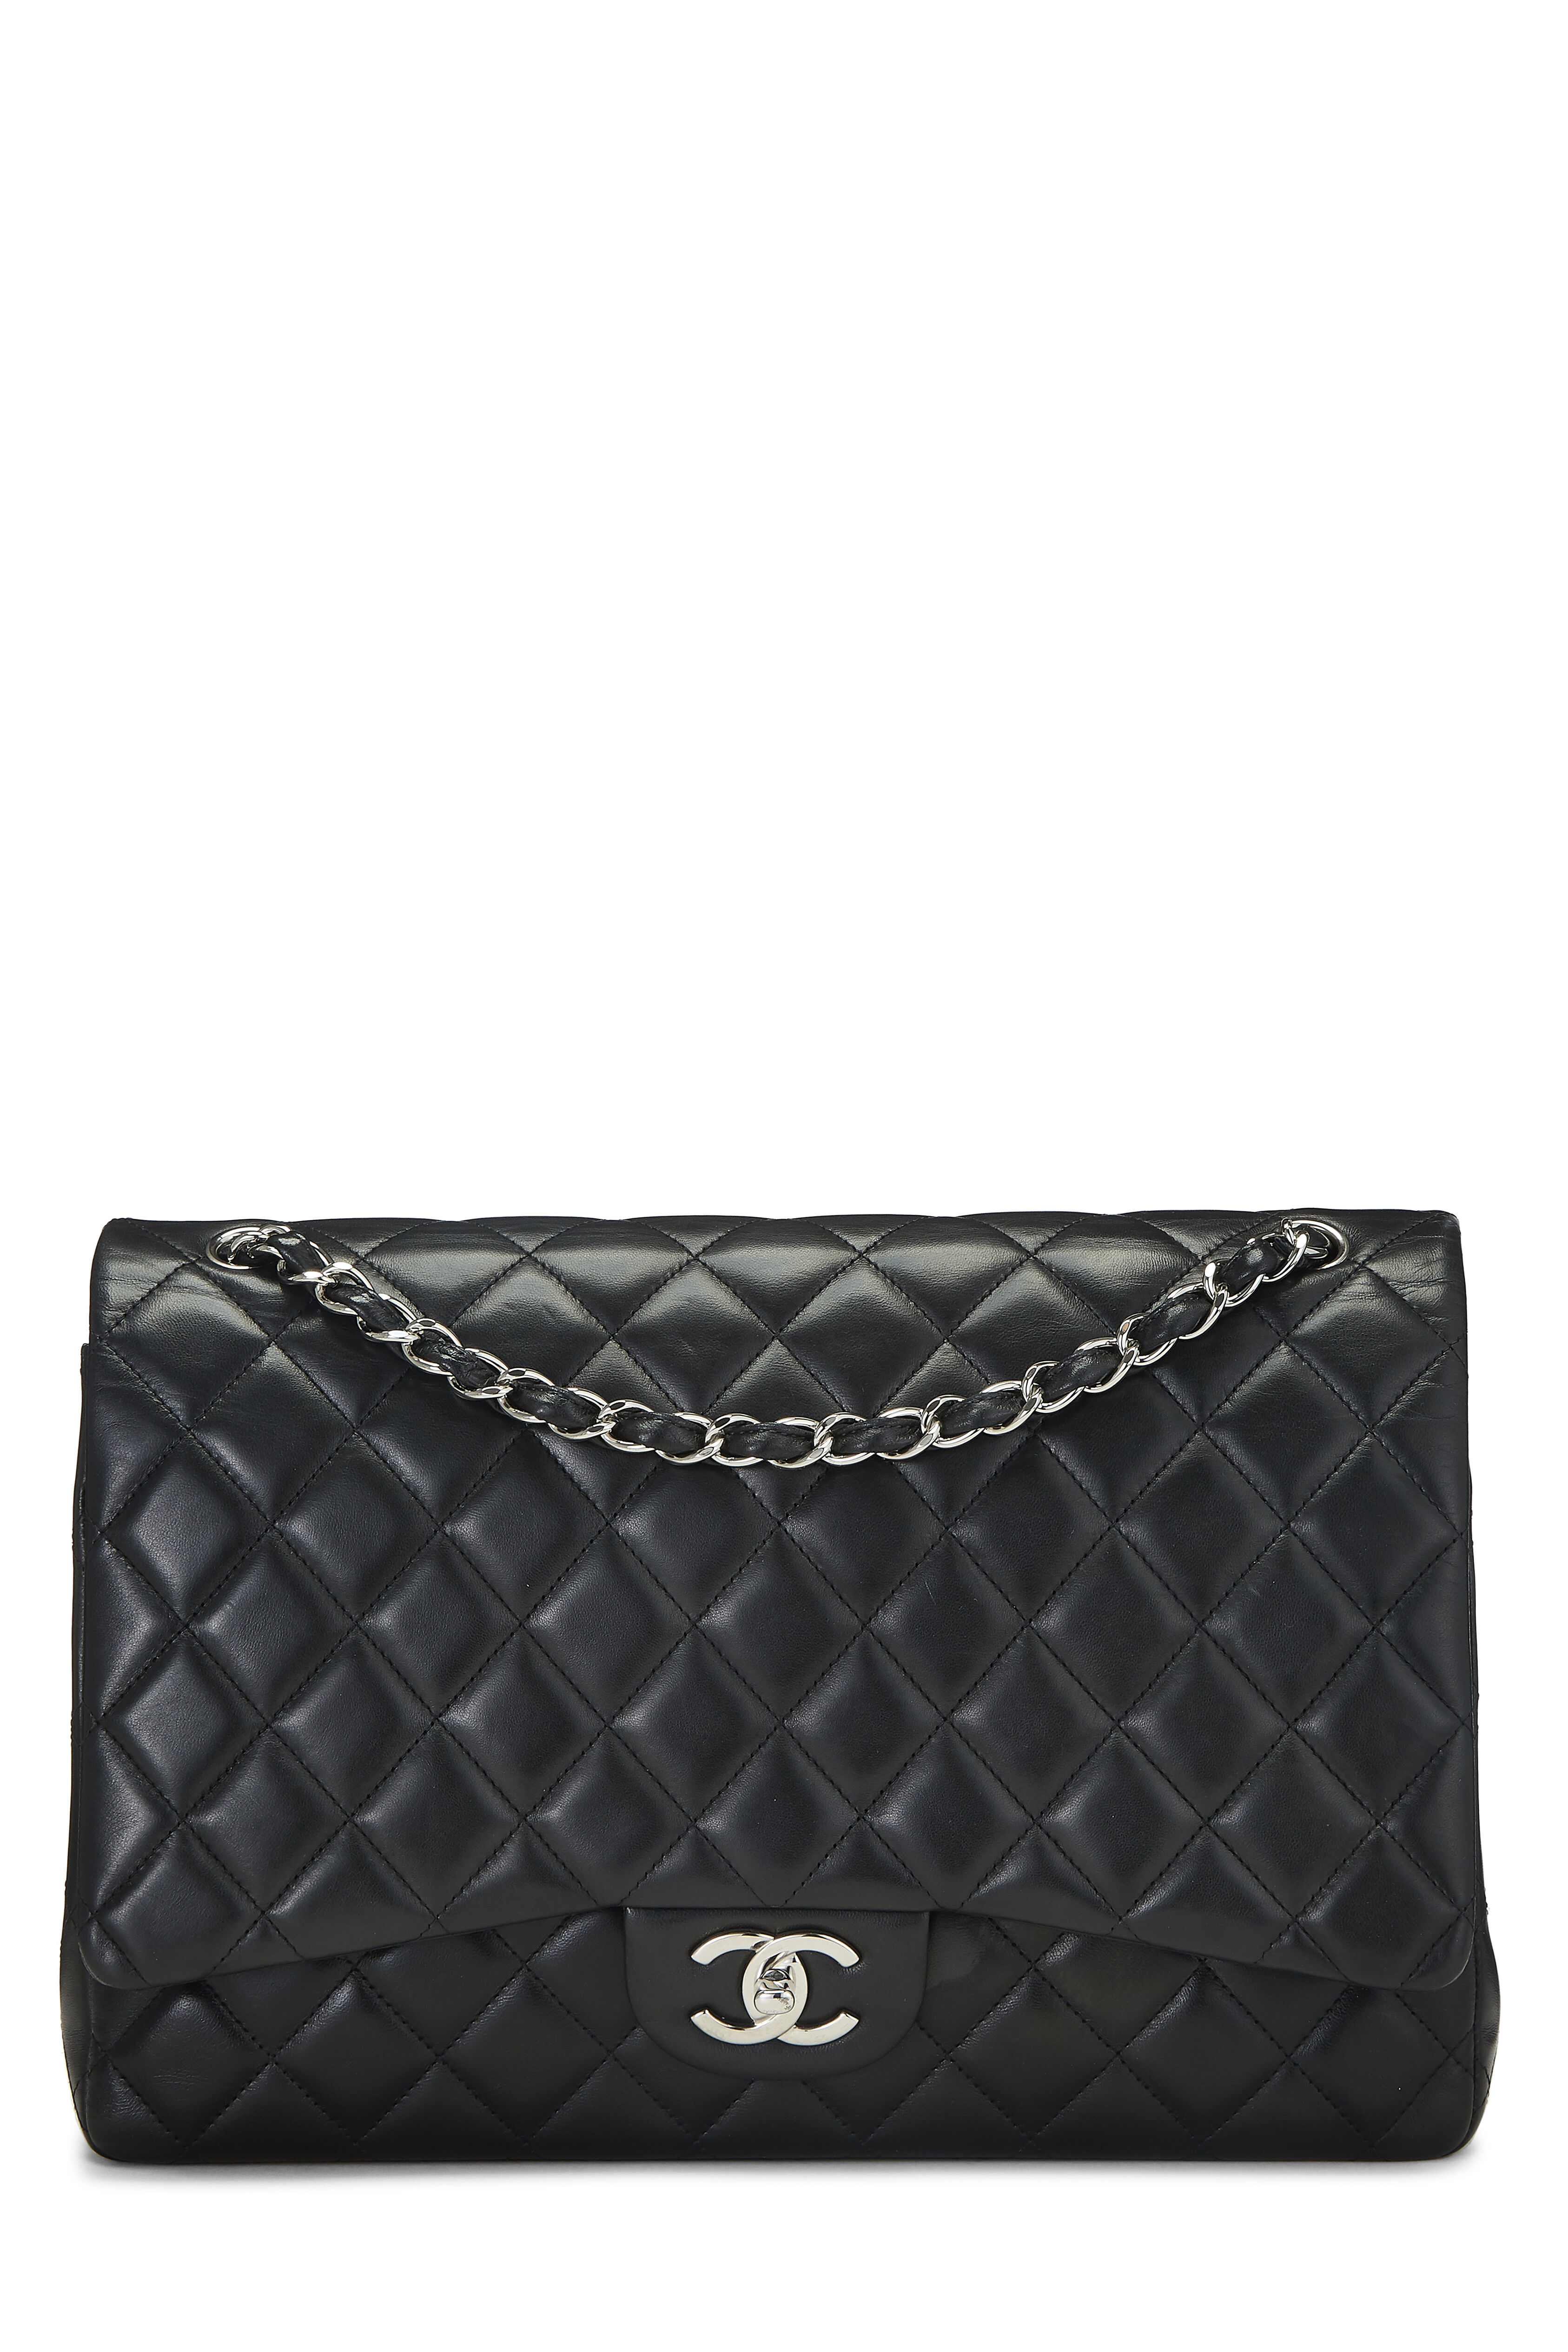 CHANEL Lambskin Classic Maxi Double Flap Bag Dark Blue Our style note to  keep you chic with this exquisite staple for festive…